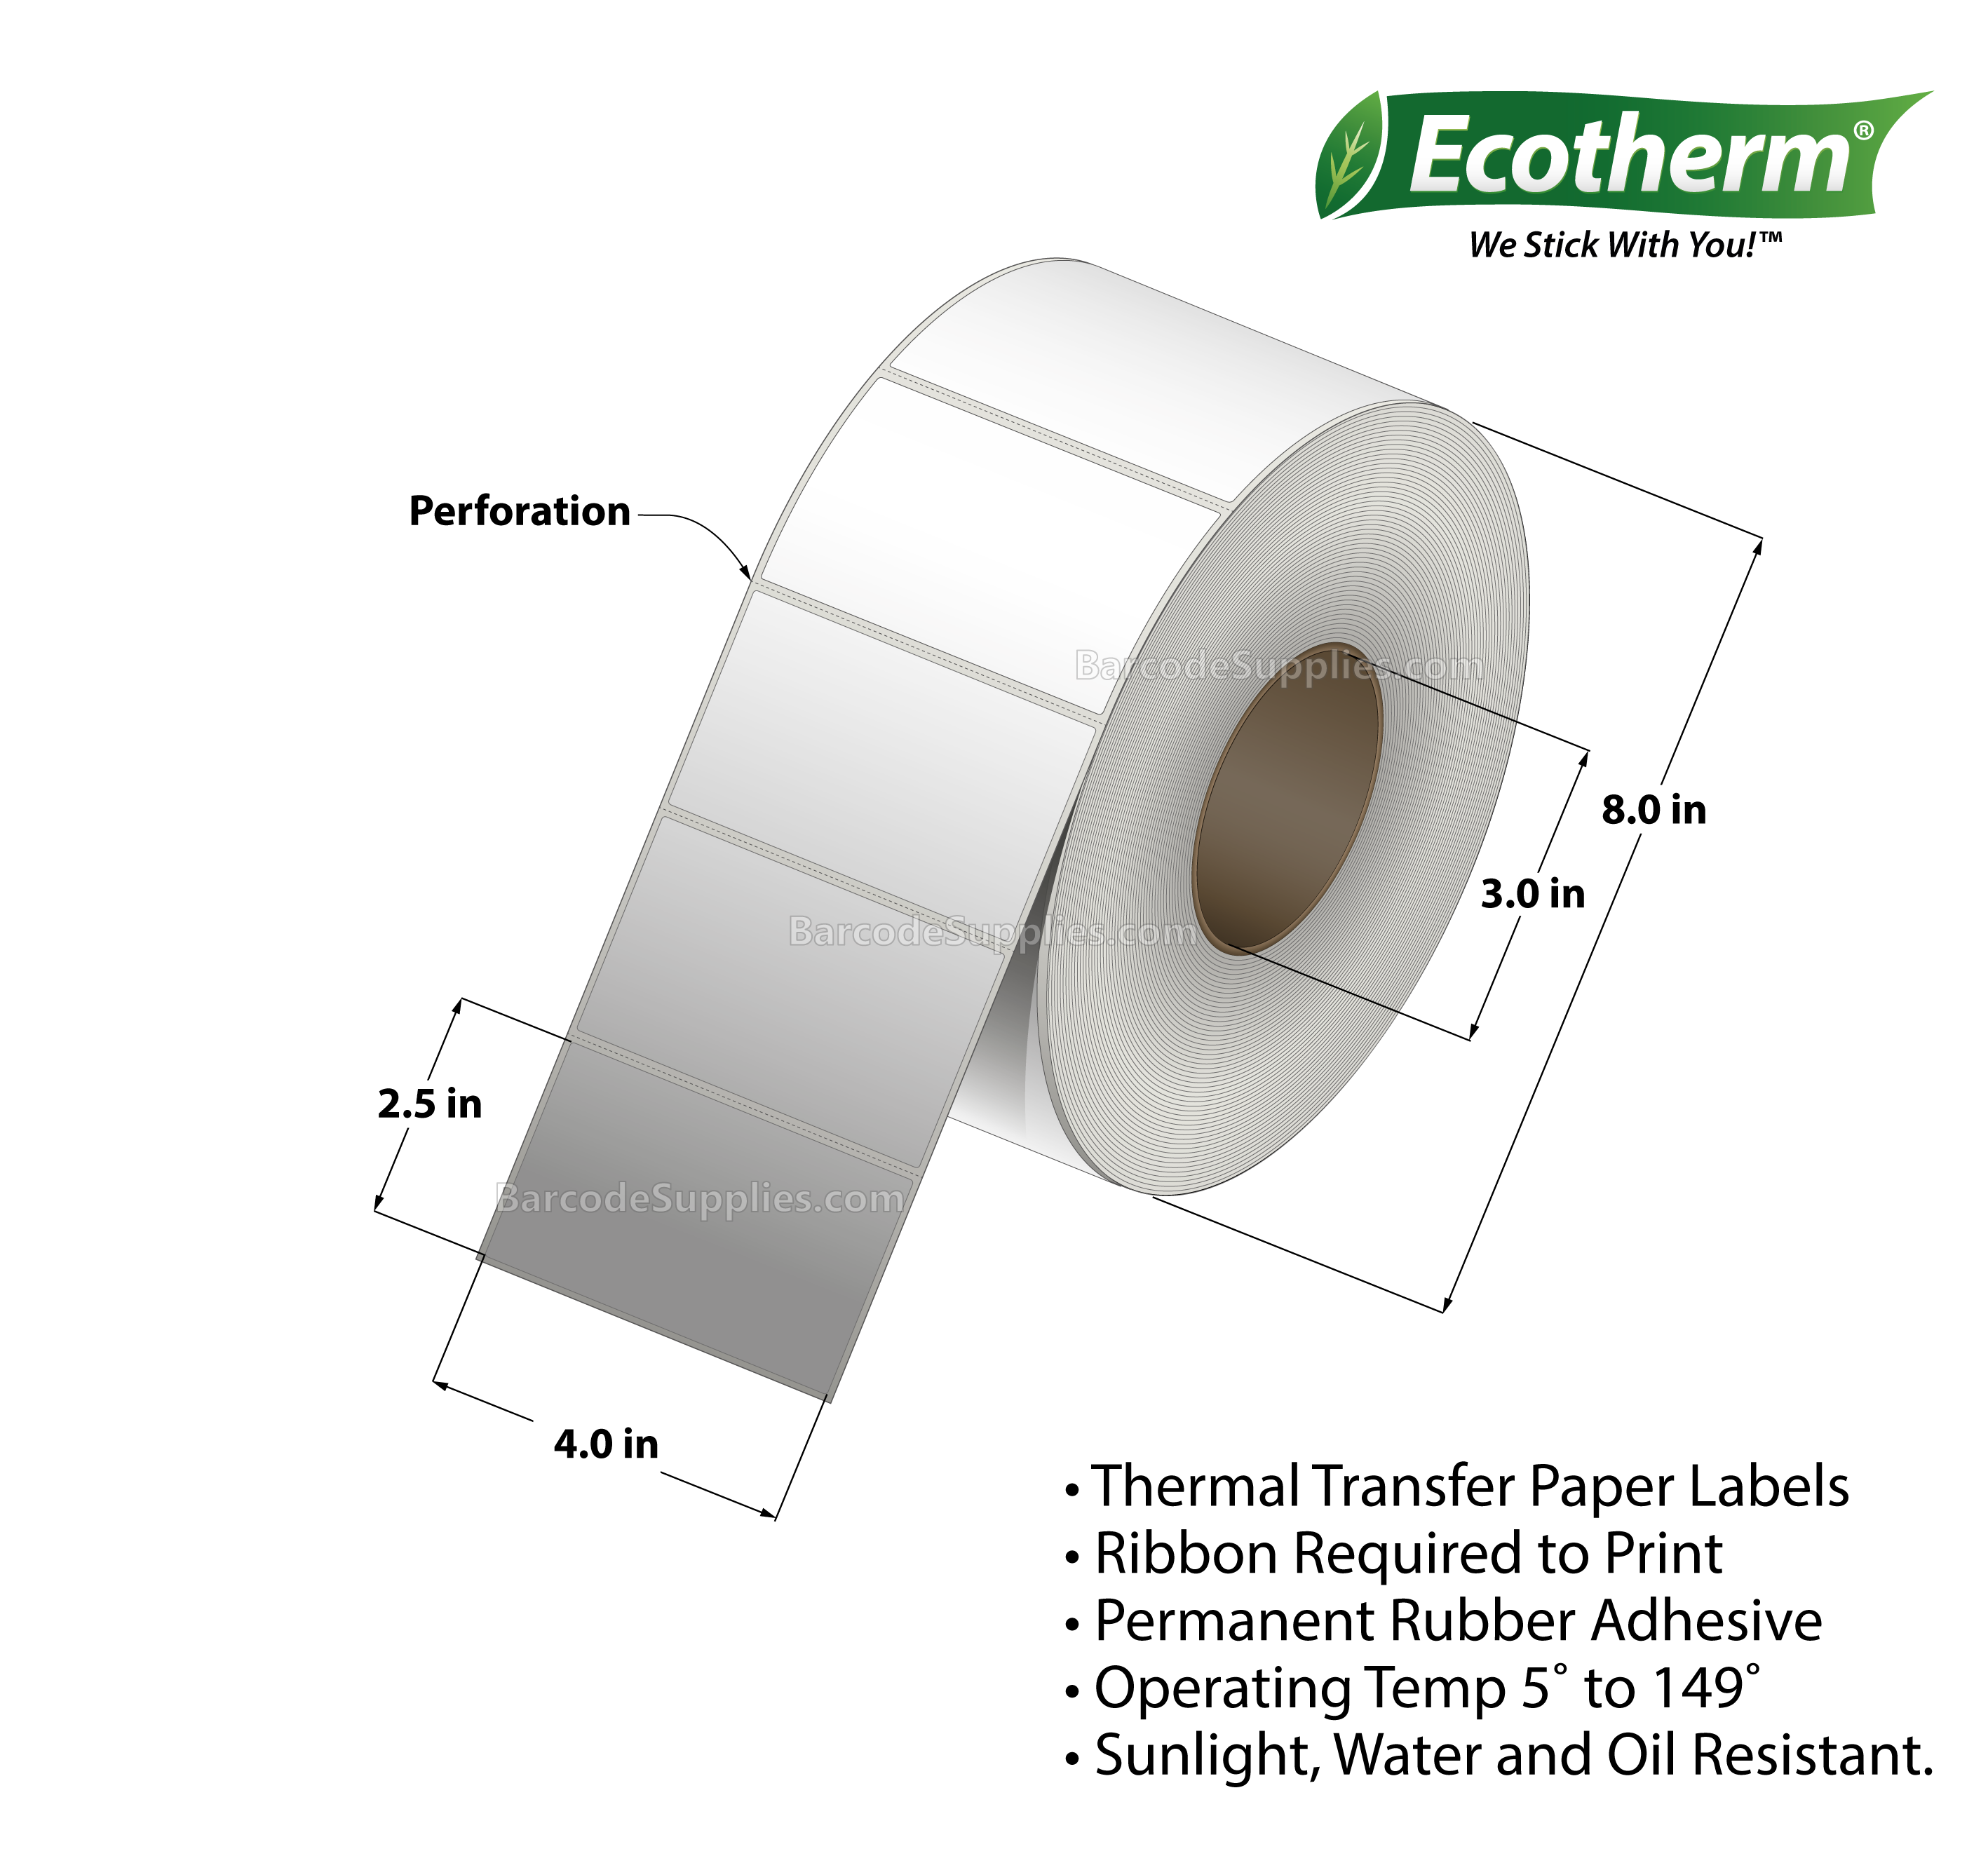 4 x 2.5 Thermal Transfer White Labels With Rubber Adhesive - Perforated - 2500 Labels Per Roll - Carton Of 4 Rolls - 10000 Labels Total - MPN: ECOTHERM28138-4